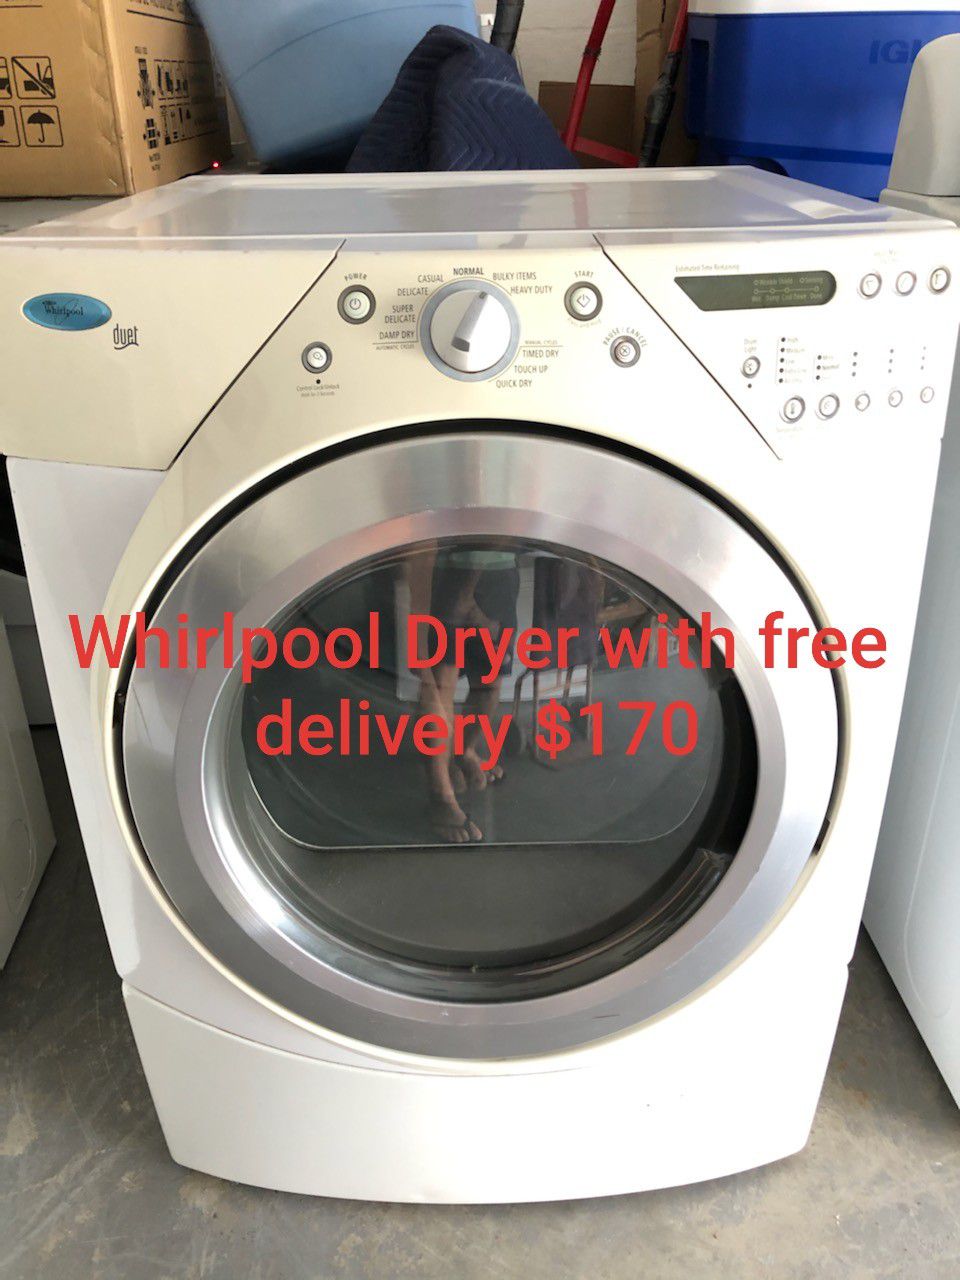 Whirlpool dryer super capacity with free delivery